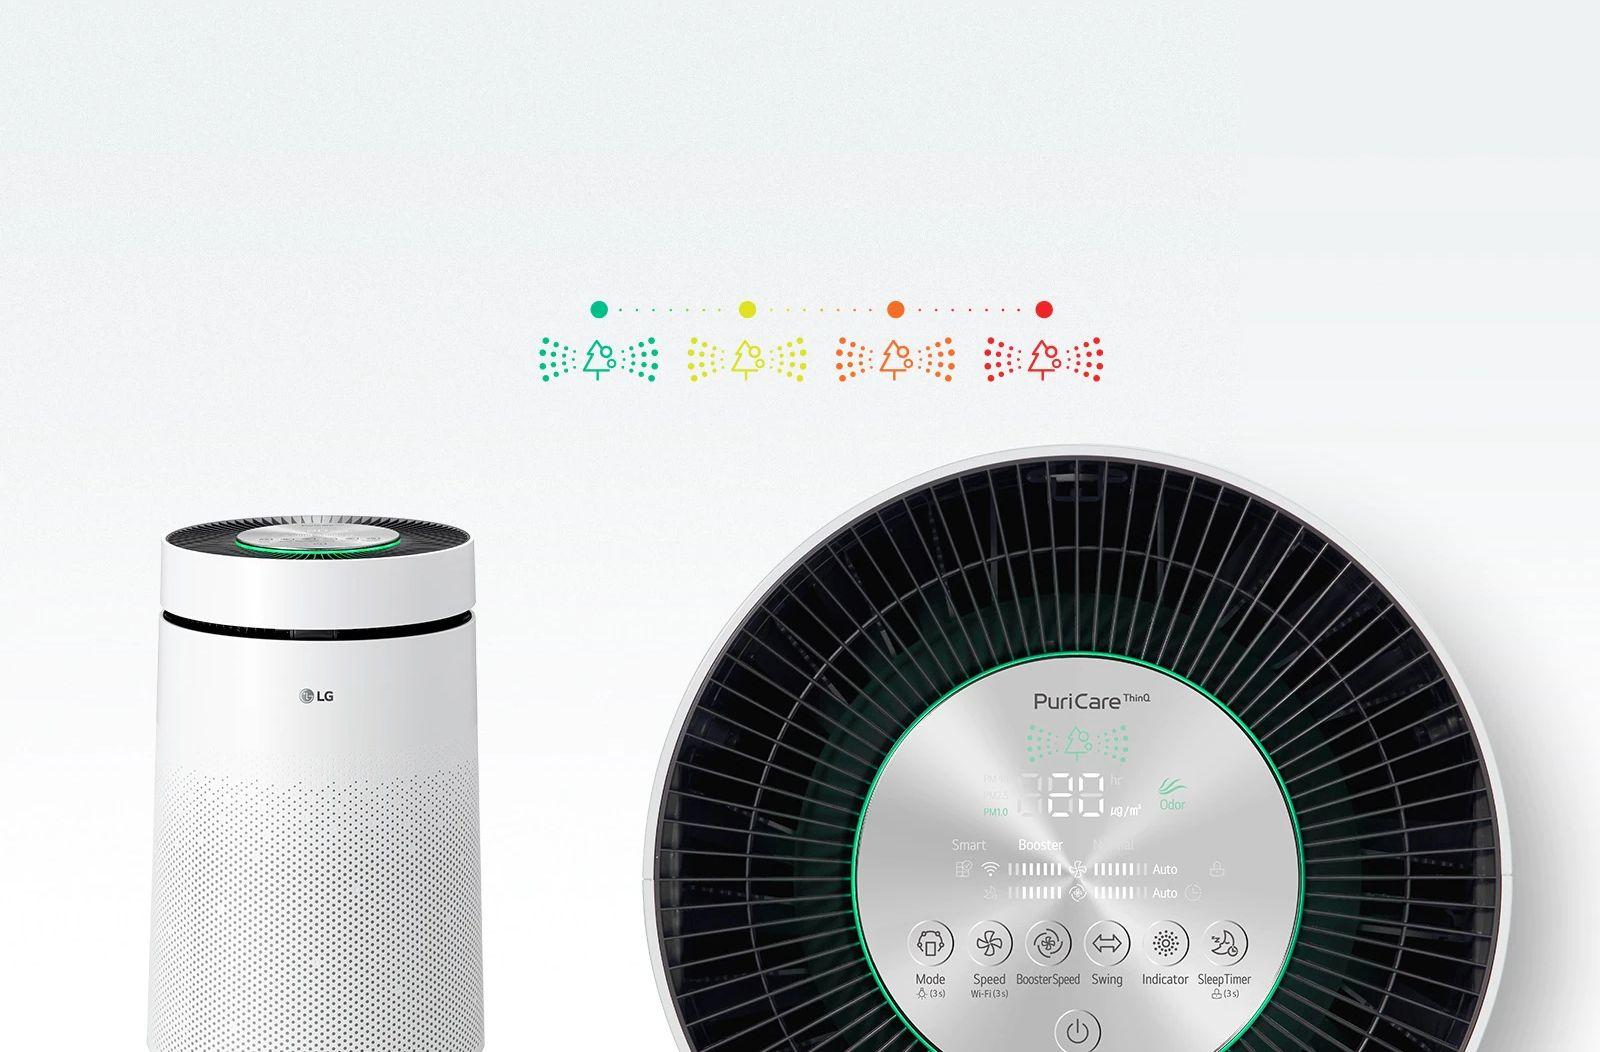 Know The Air Quality, Adjust Automatically